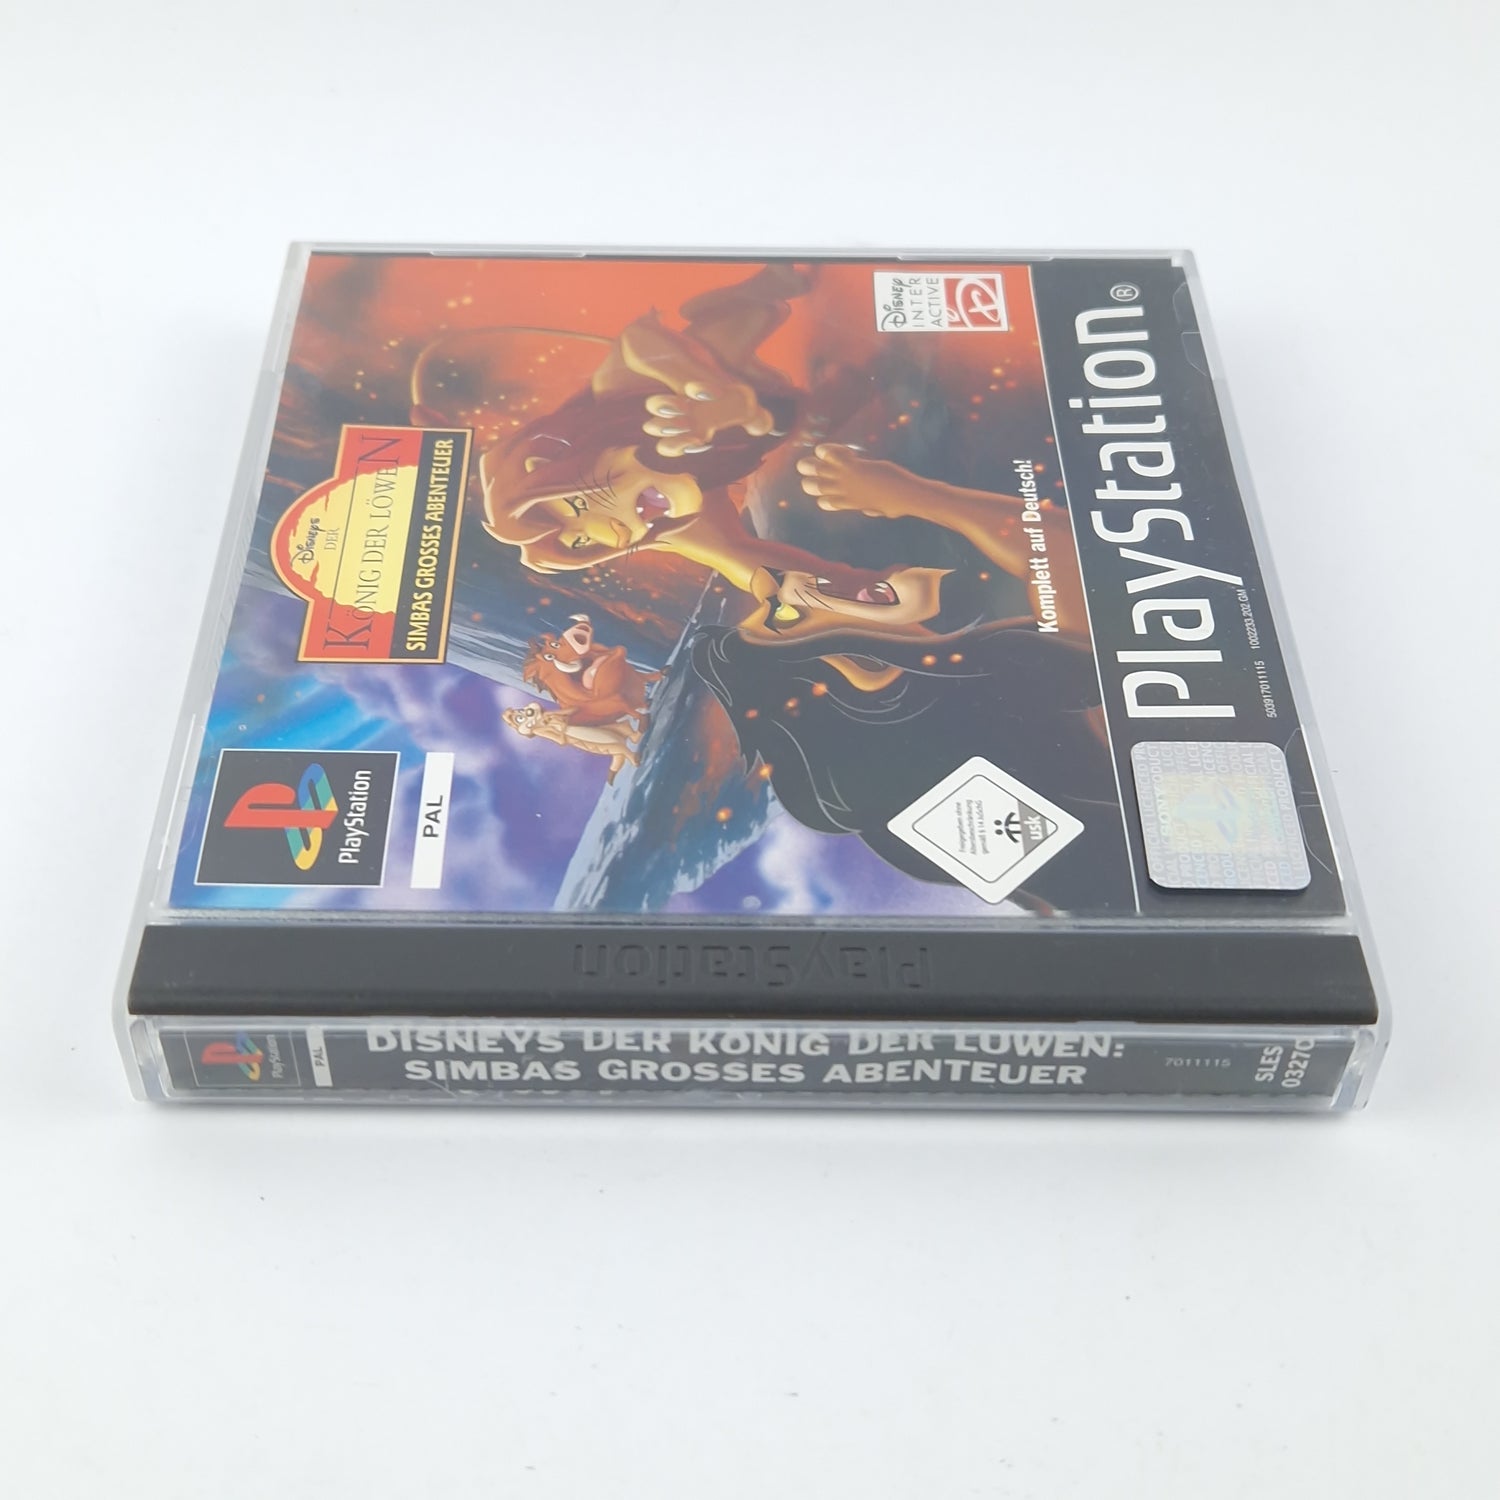 Playstation 1 Game: The Lion King - OVP Instructions CD / SONY PS1 PSX PAL